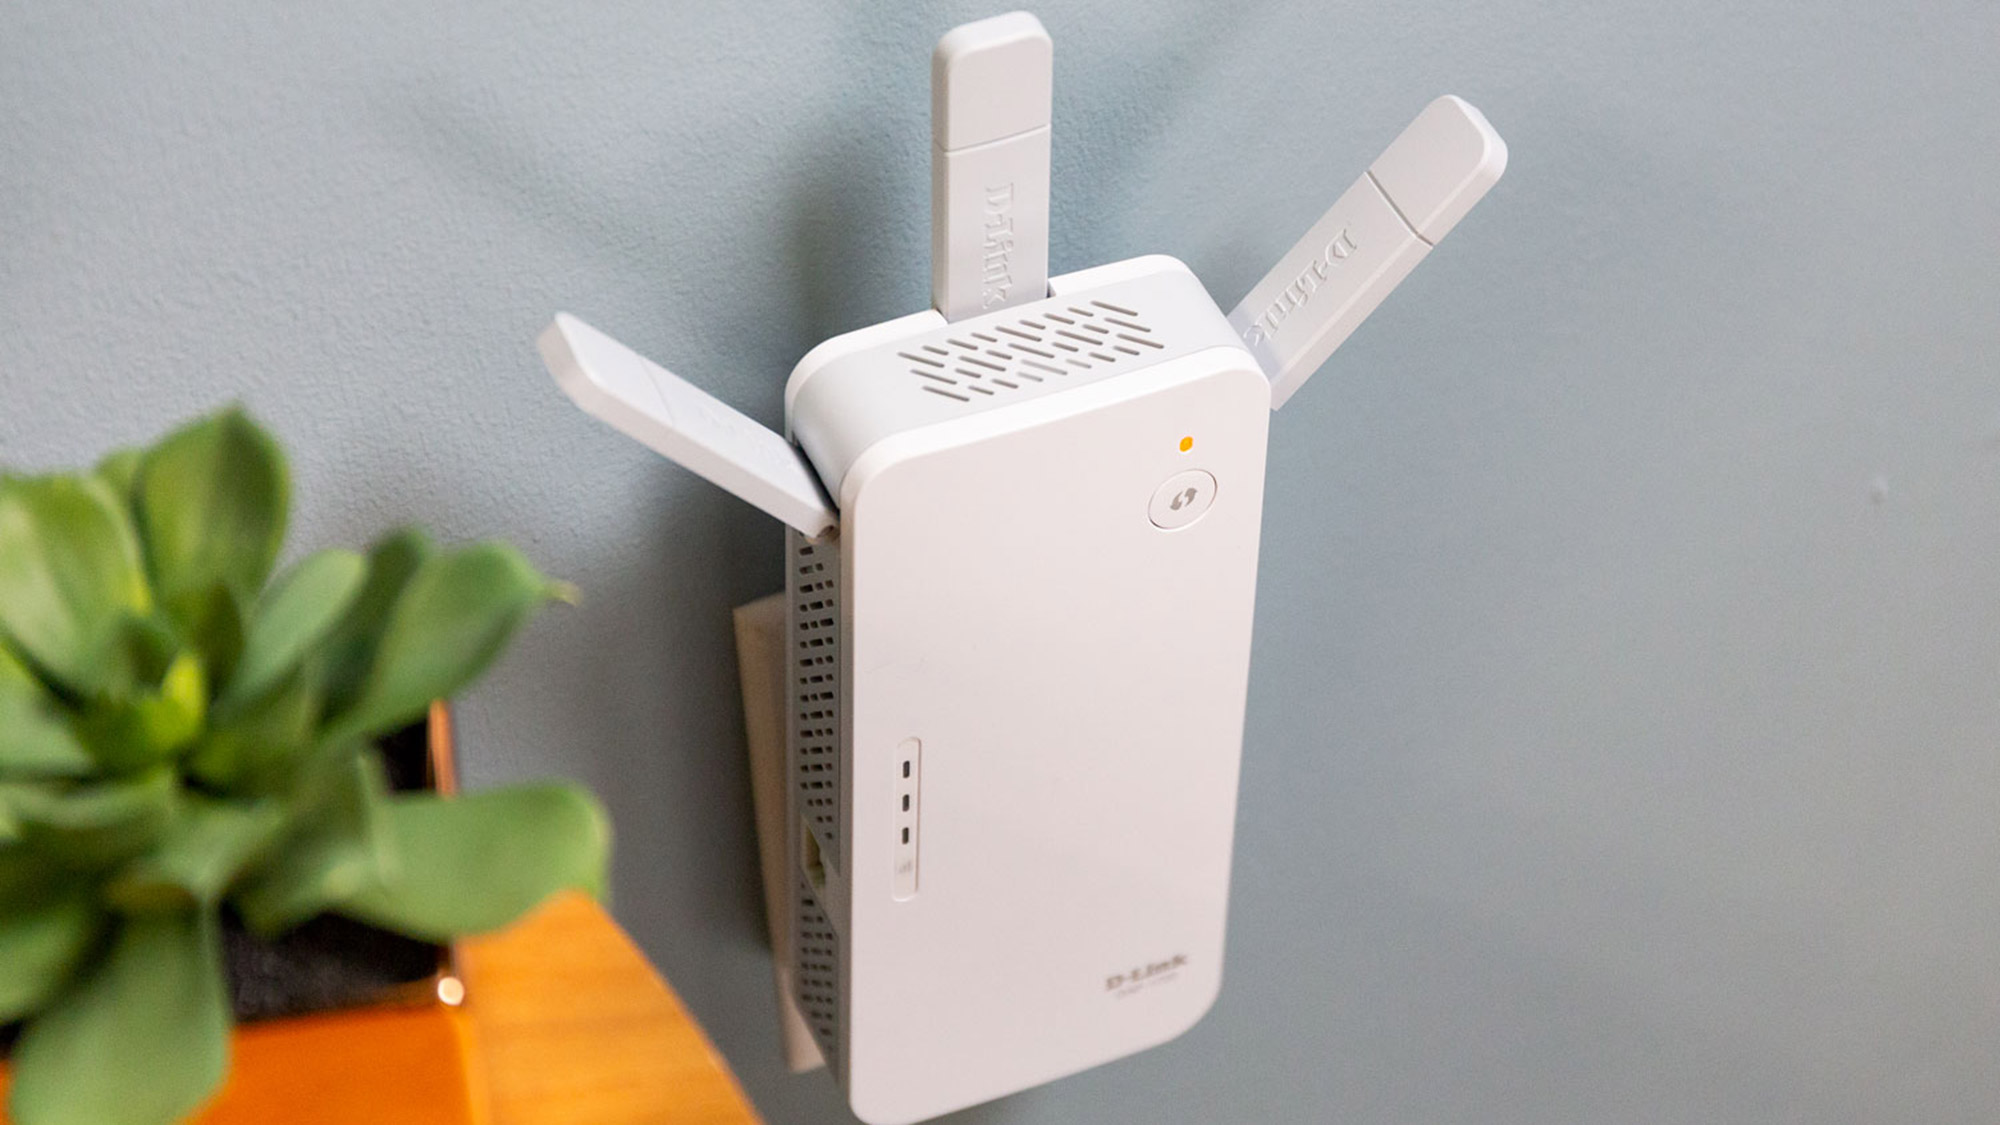 How Do Wi-Fi Extenders Work?